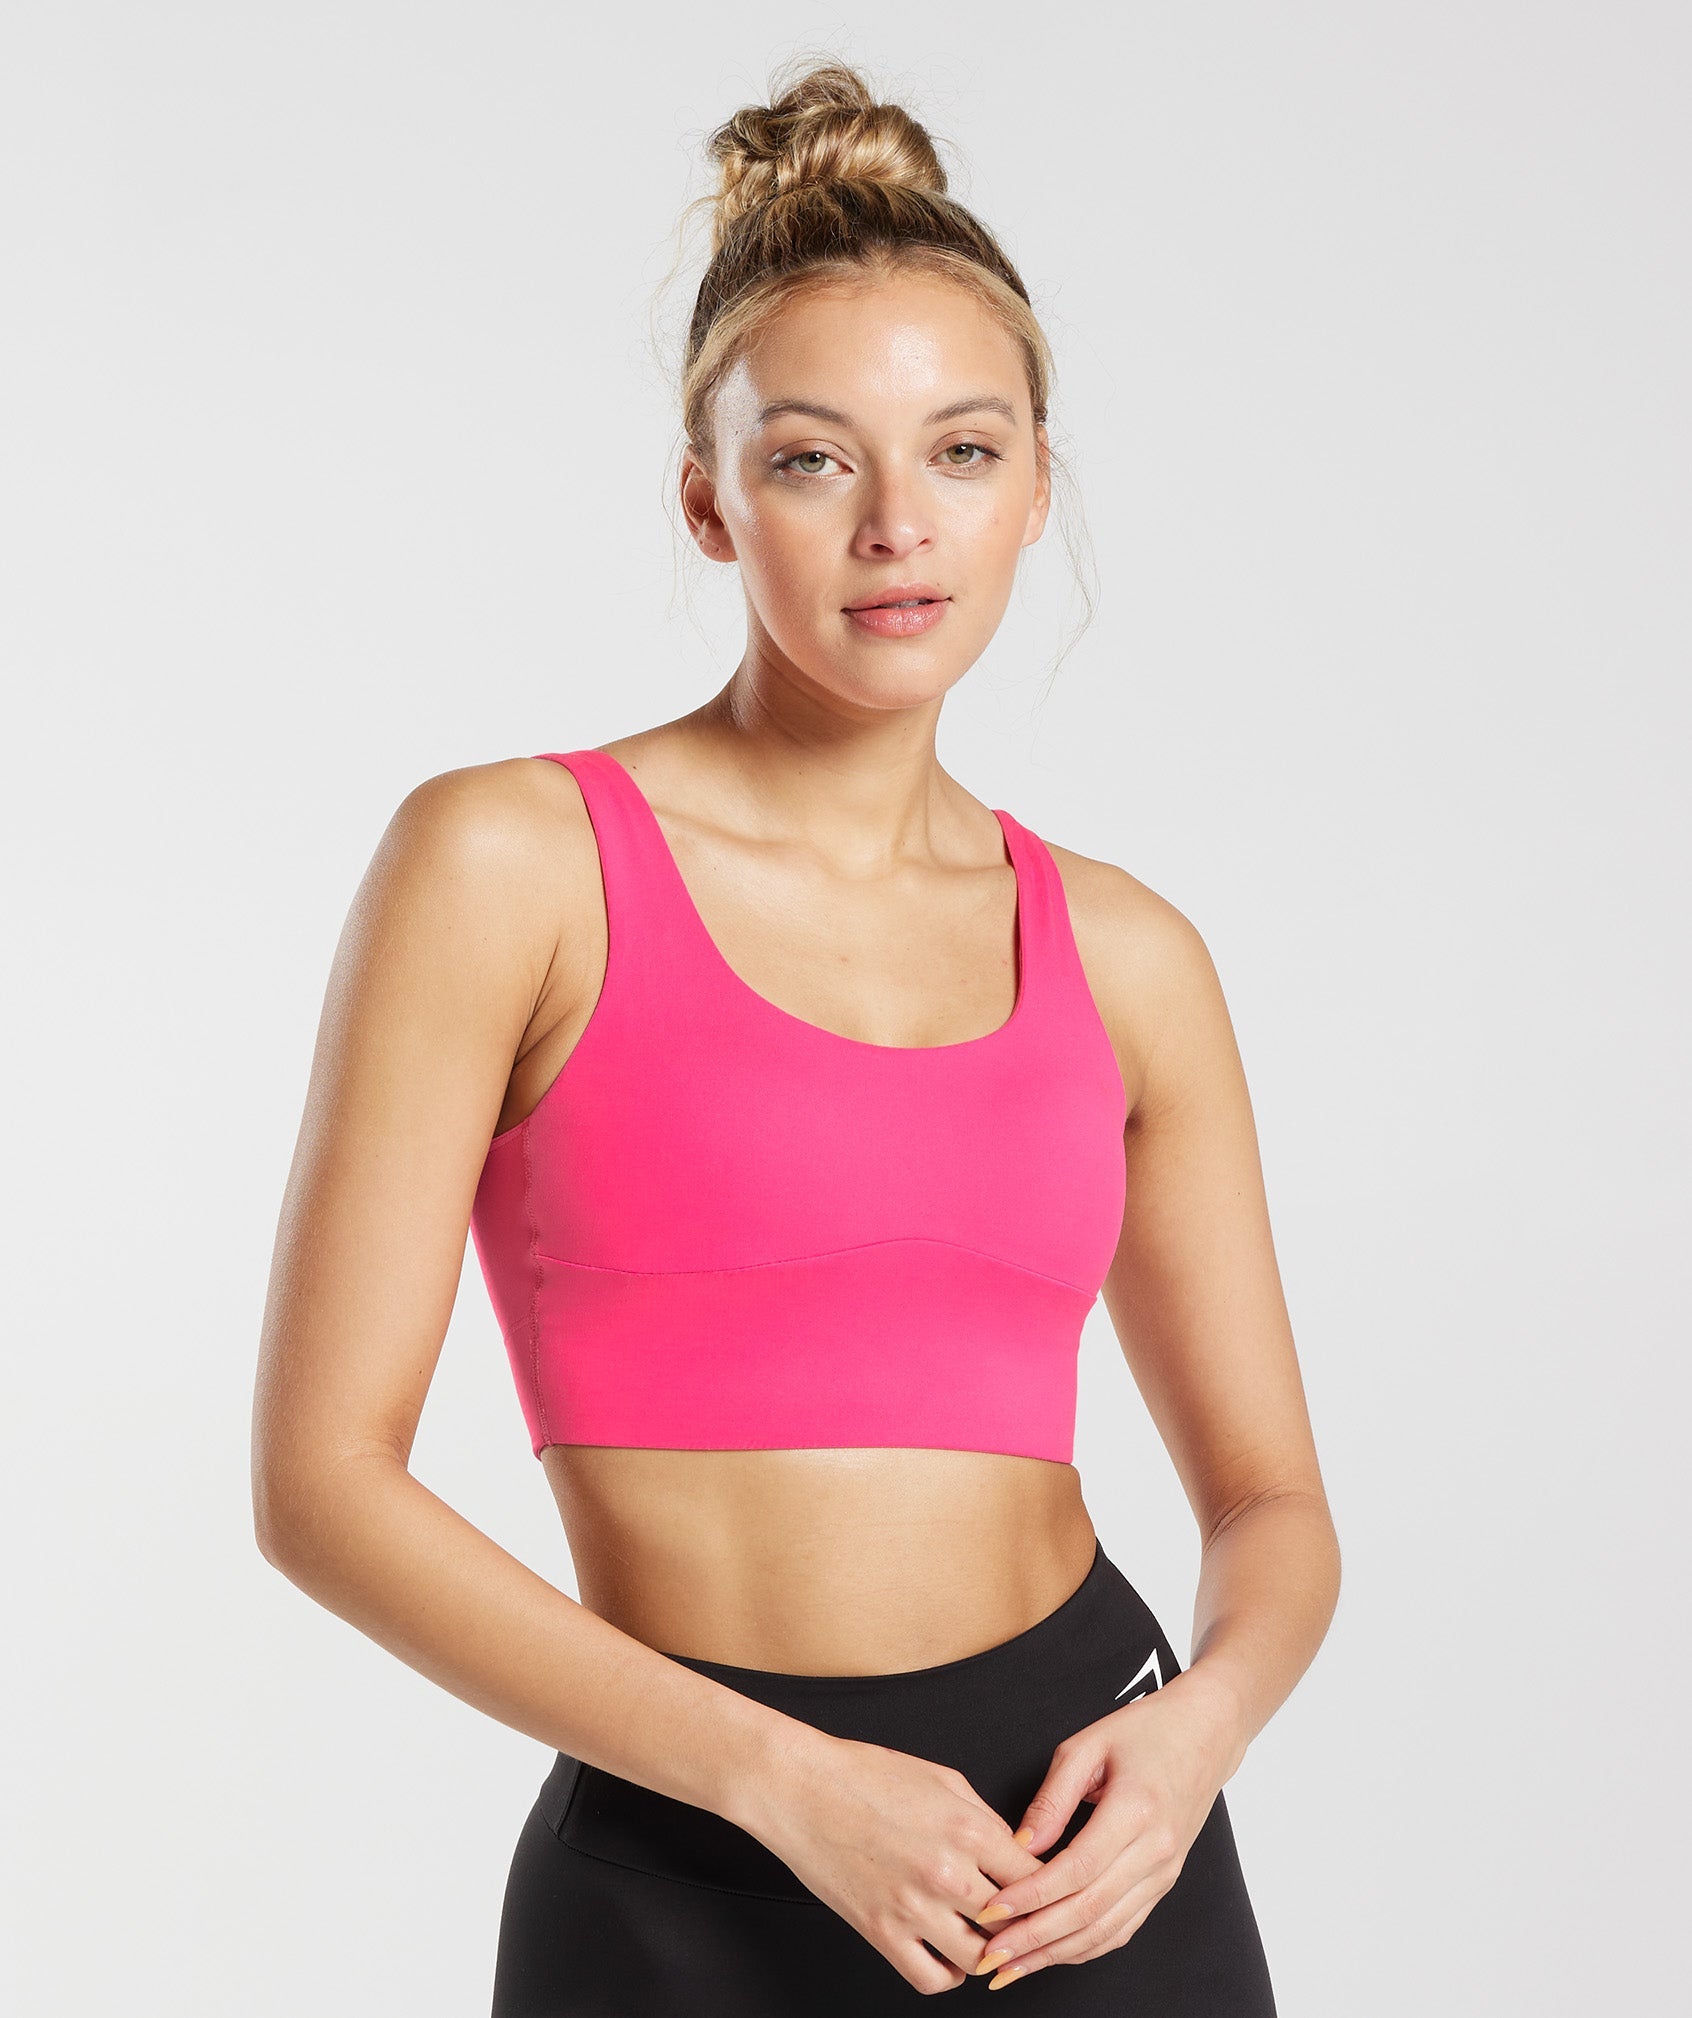 EHQJNJ Female Women's Sports Bras Padding Solid Color Casual Wear